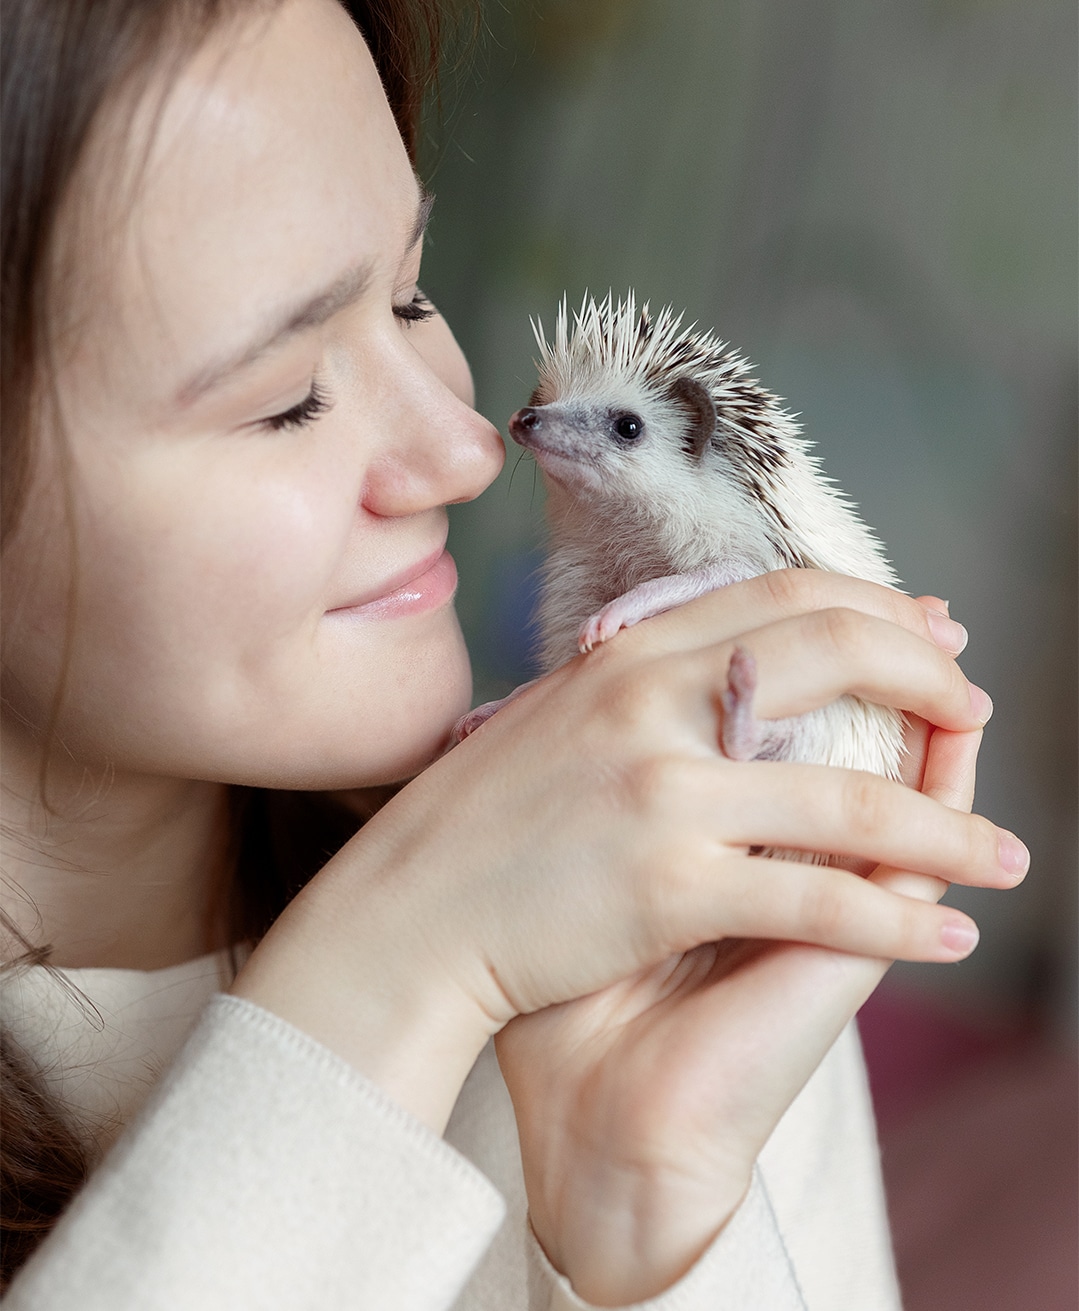 A young woman holding her hedgehog up to face while smiling